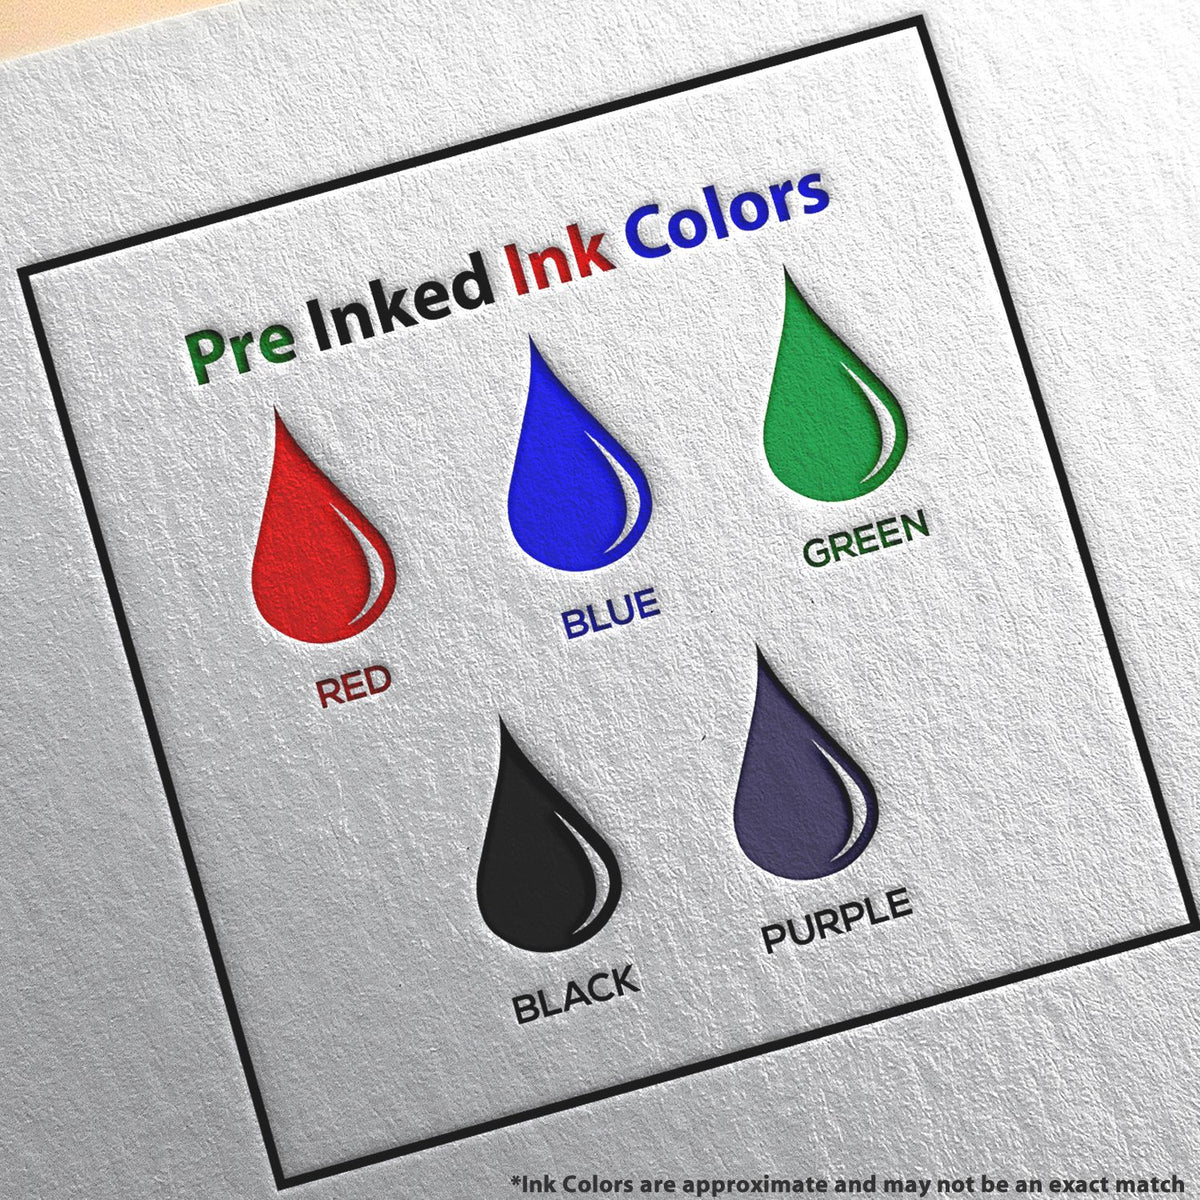 A picture showing the different ink colors or hues available for the Super Slim South Dakota Notary Public Stamp product.